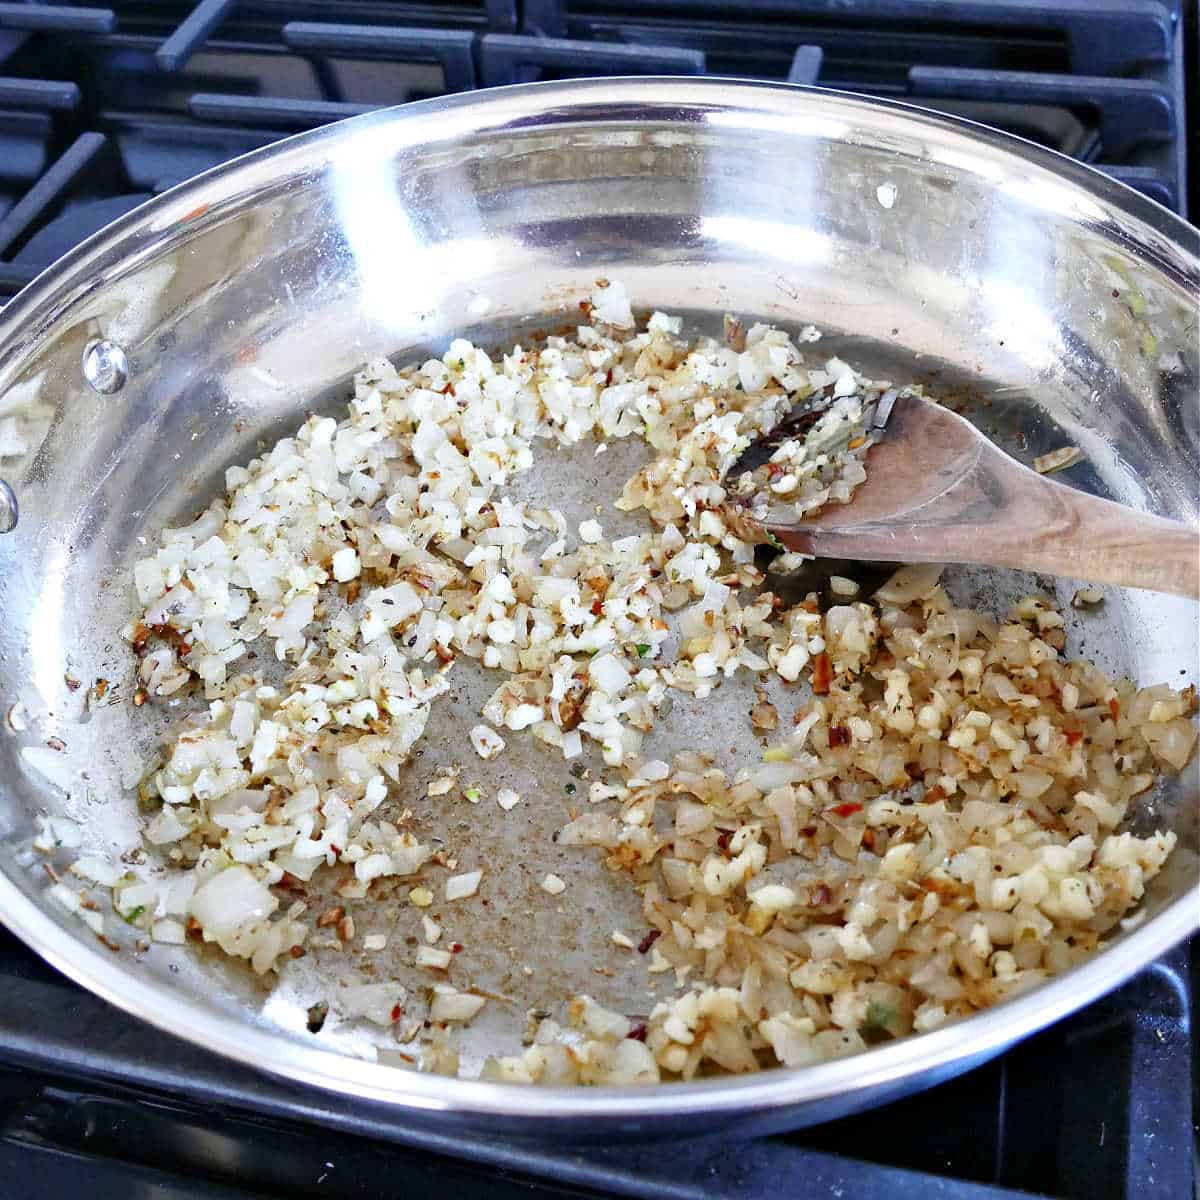 shallots, garlic, and spices cooking in olive oil in a skillet